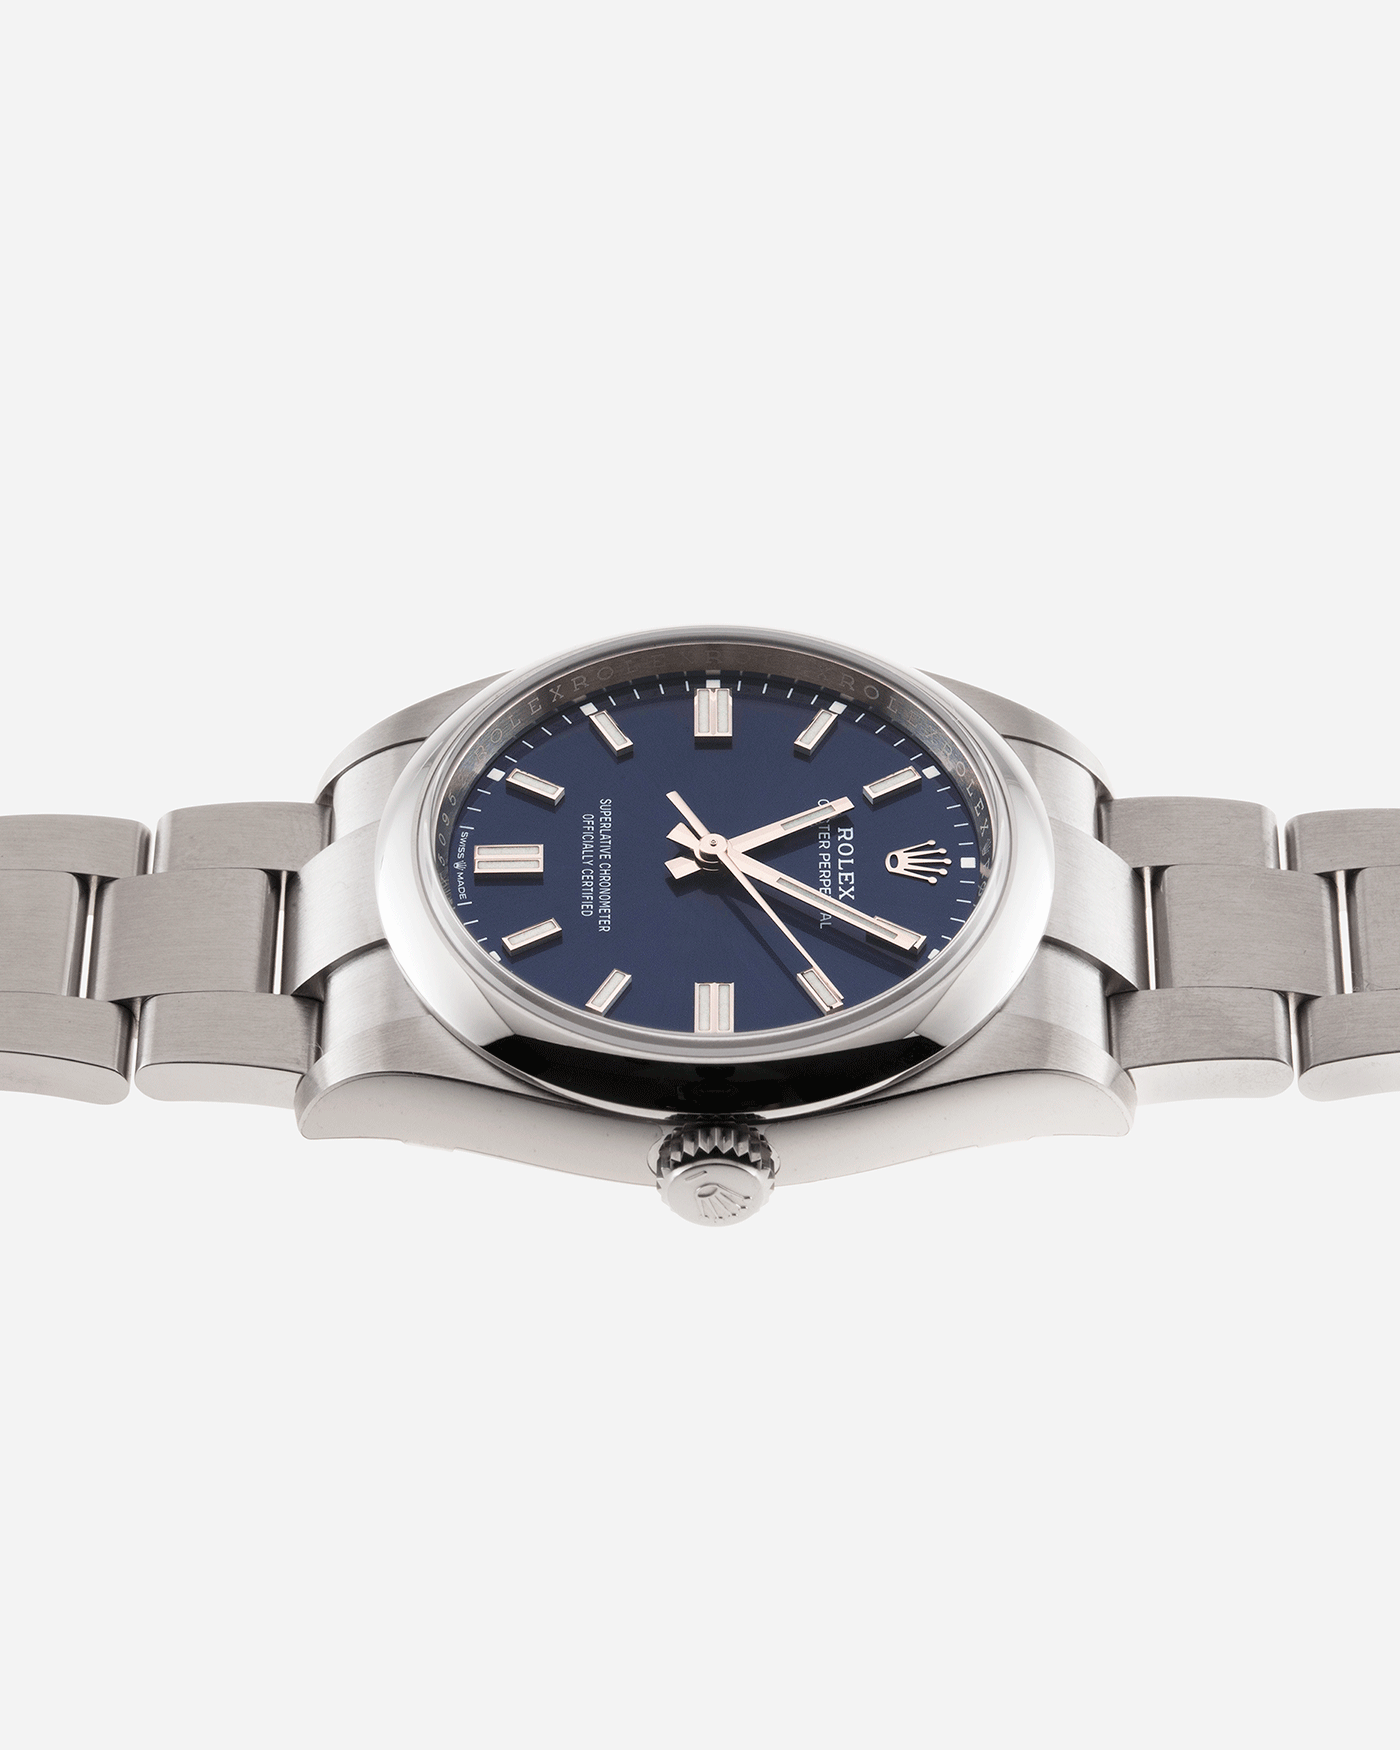 Brand: Rolex Year: 2020 Model: Oyster Perpetual 36 Reference Number: 126000 Material: 904L Stainless Steel Movement: Cal. 3230 Case Diameter: 36mm Bracelet: Stainless Steel Rolex Oyster Bracelet